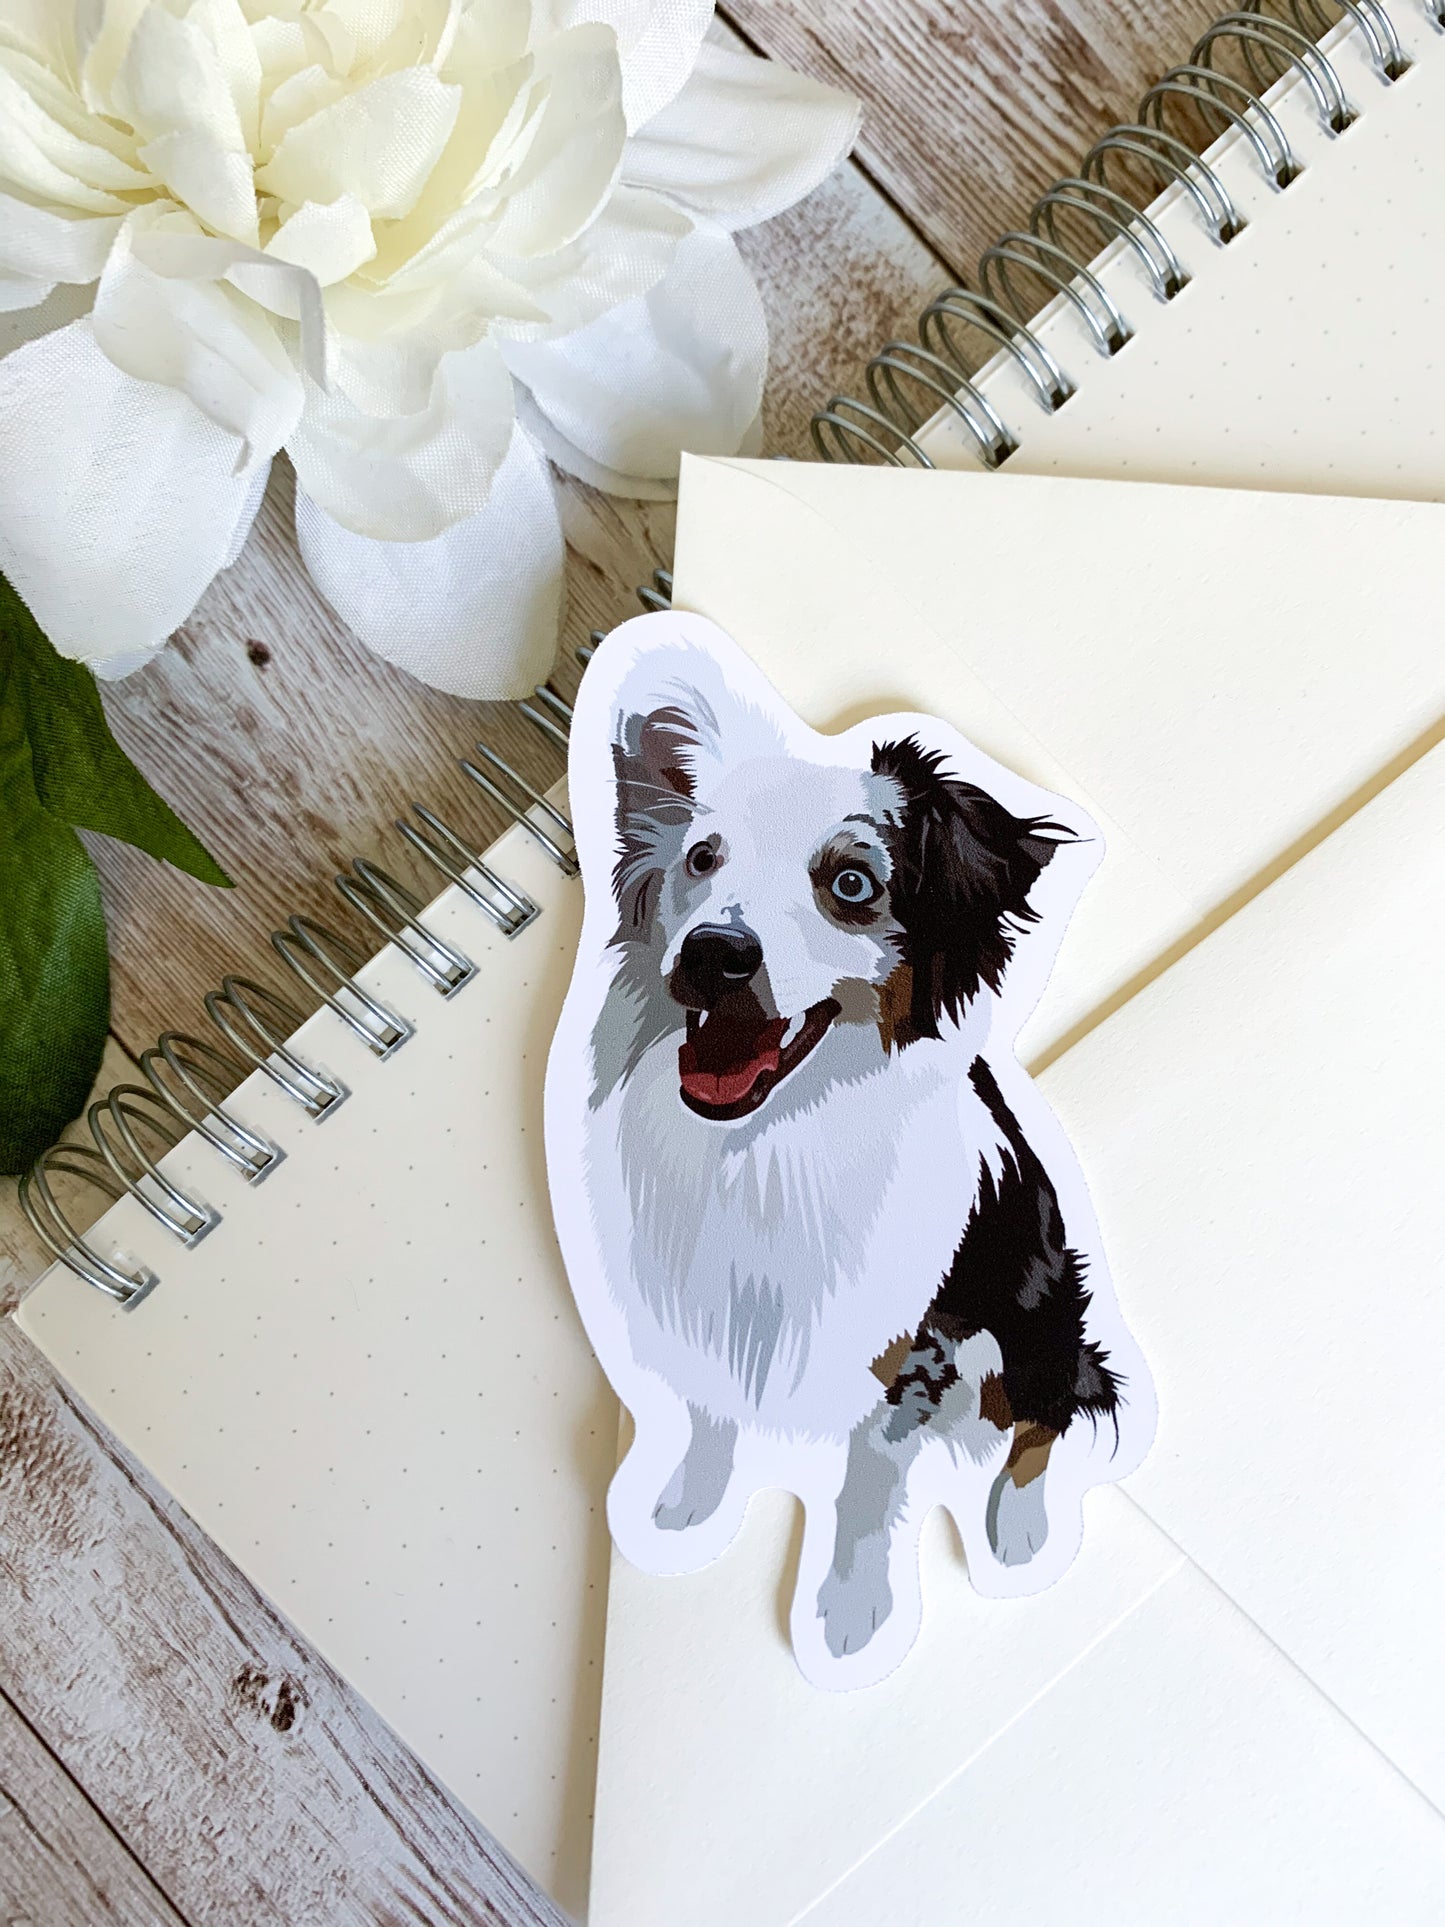 Custom pet portrait and sticker listing - personalized pet artwork and stickers for sale